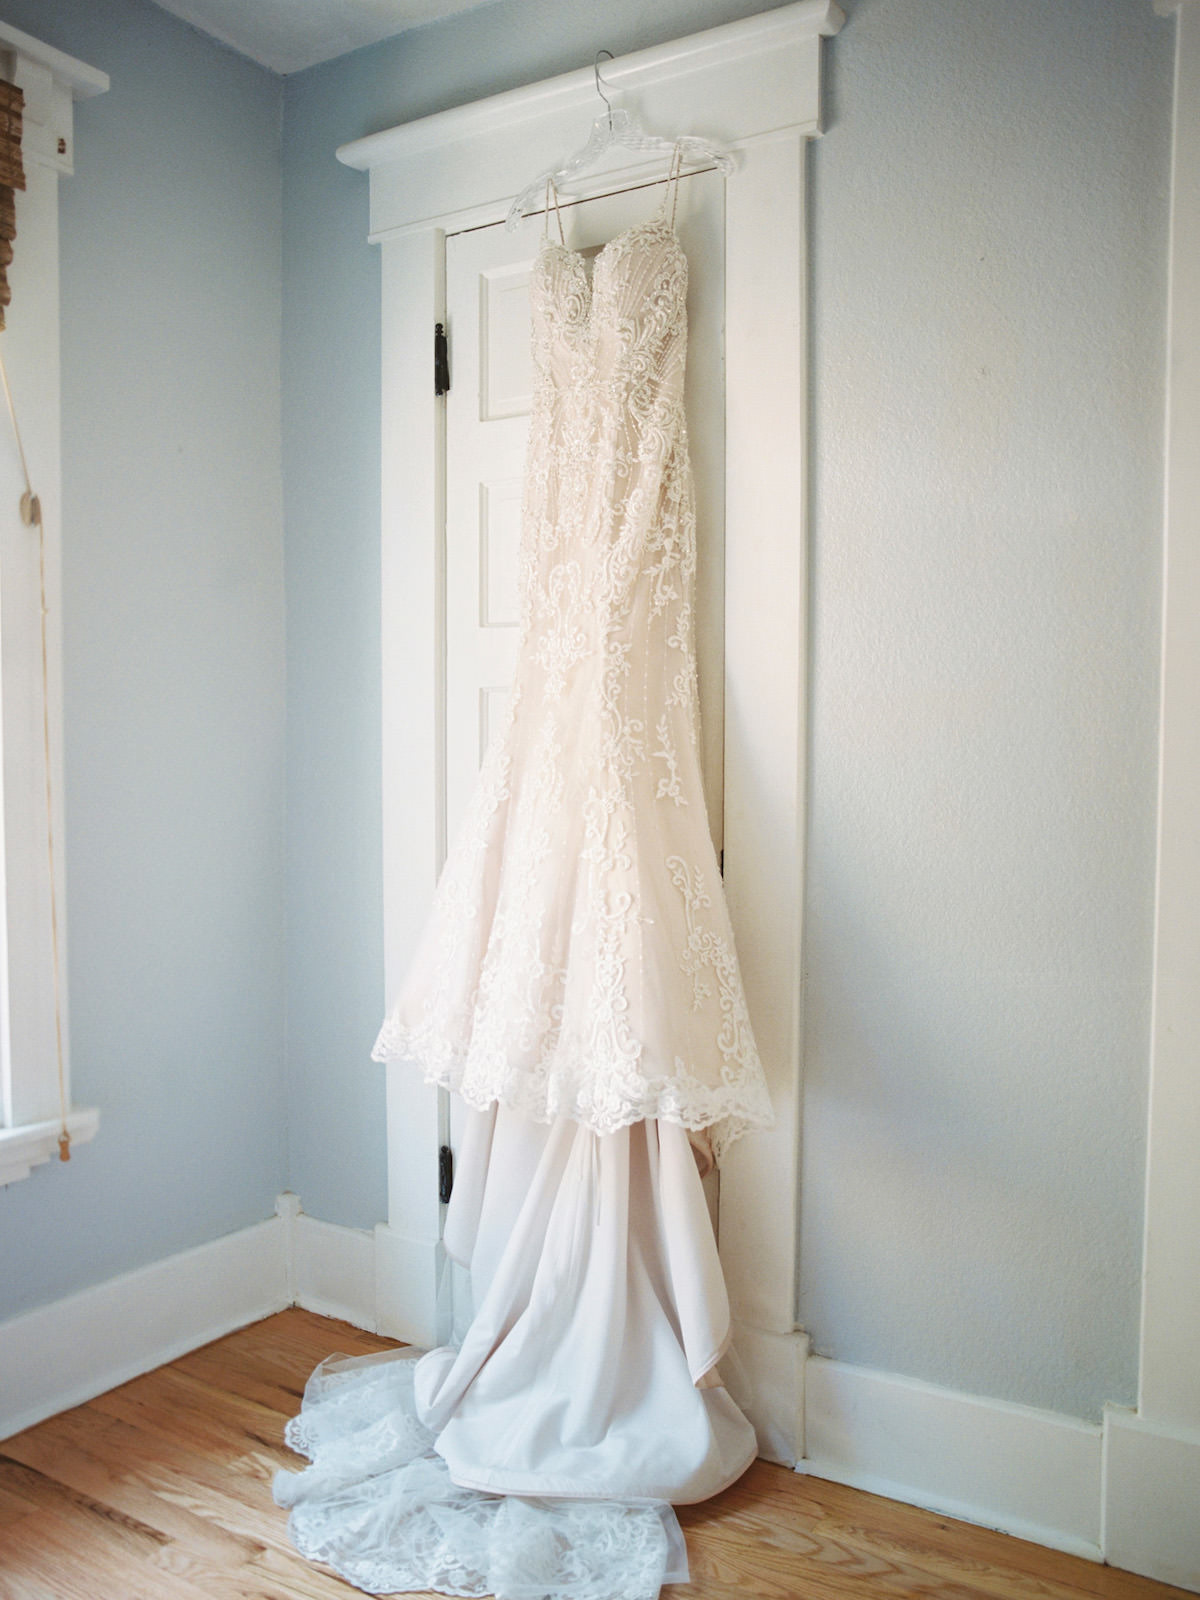 Champagne and Ivory Lace Sweetheart Wedding Dress Bridal Gown Hanging Up